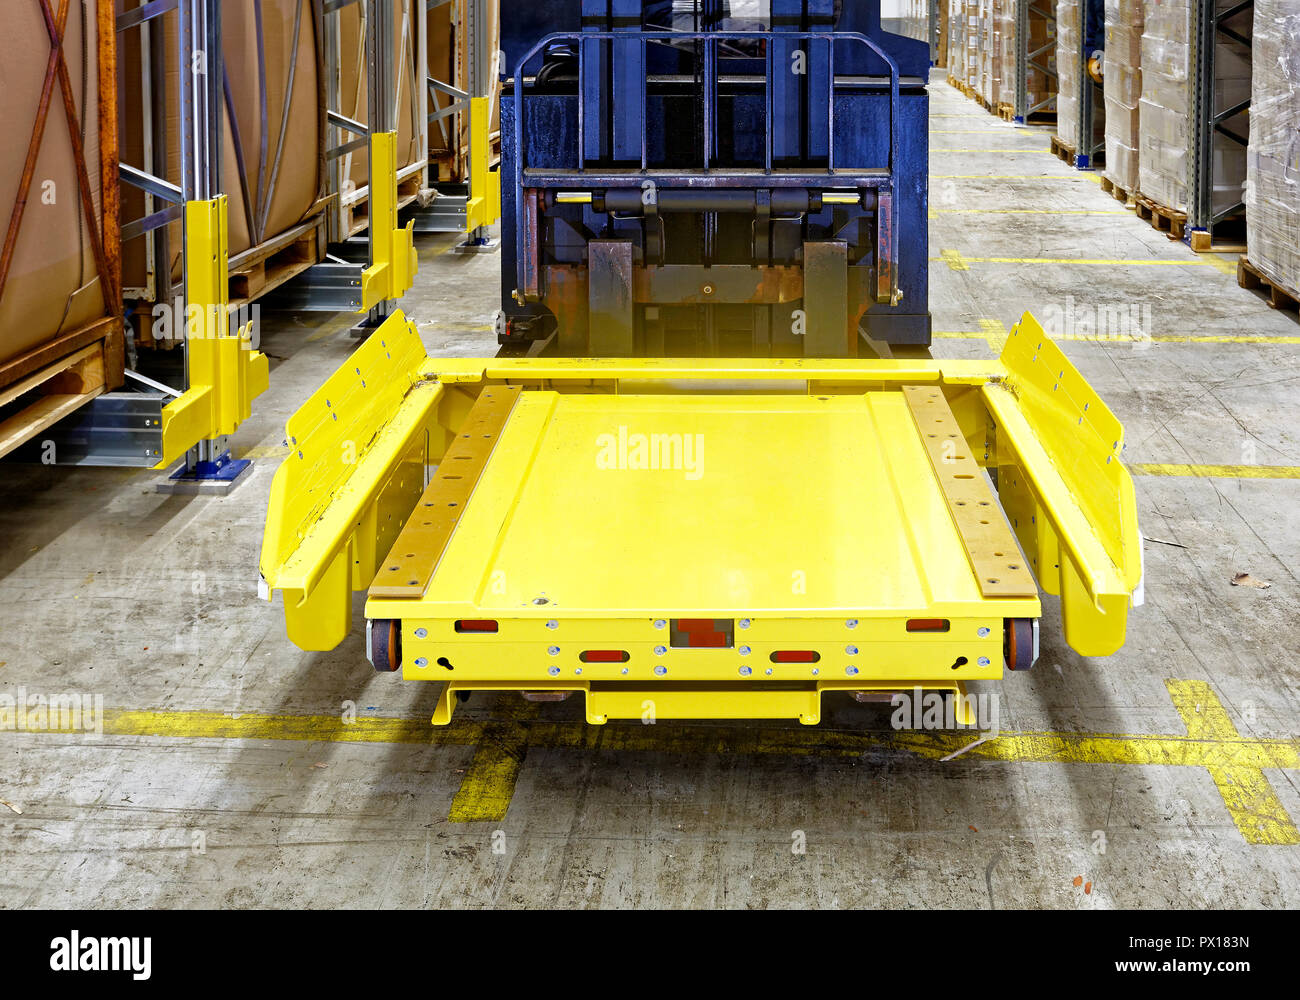 Pallet Shuttle Robot at Forklift in Semi Automated Warehouse Stock Photo